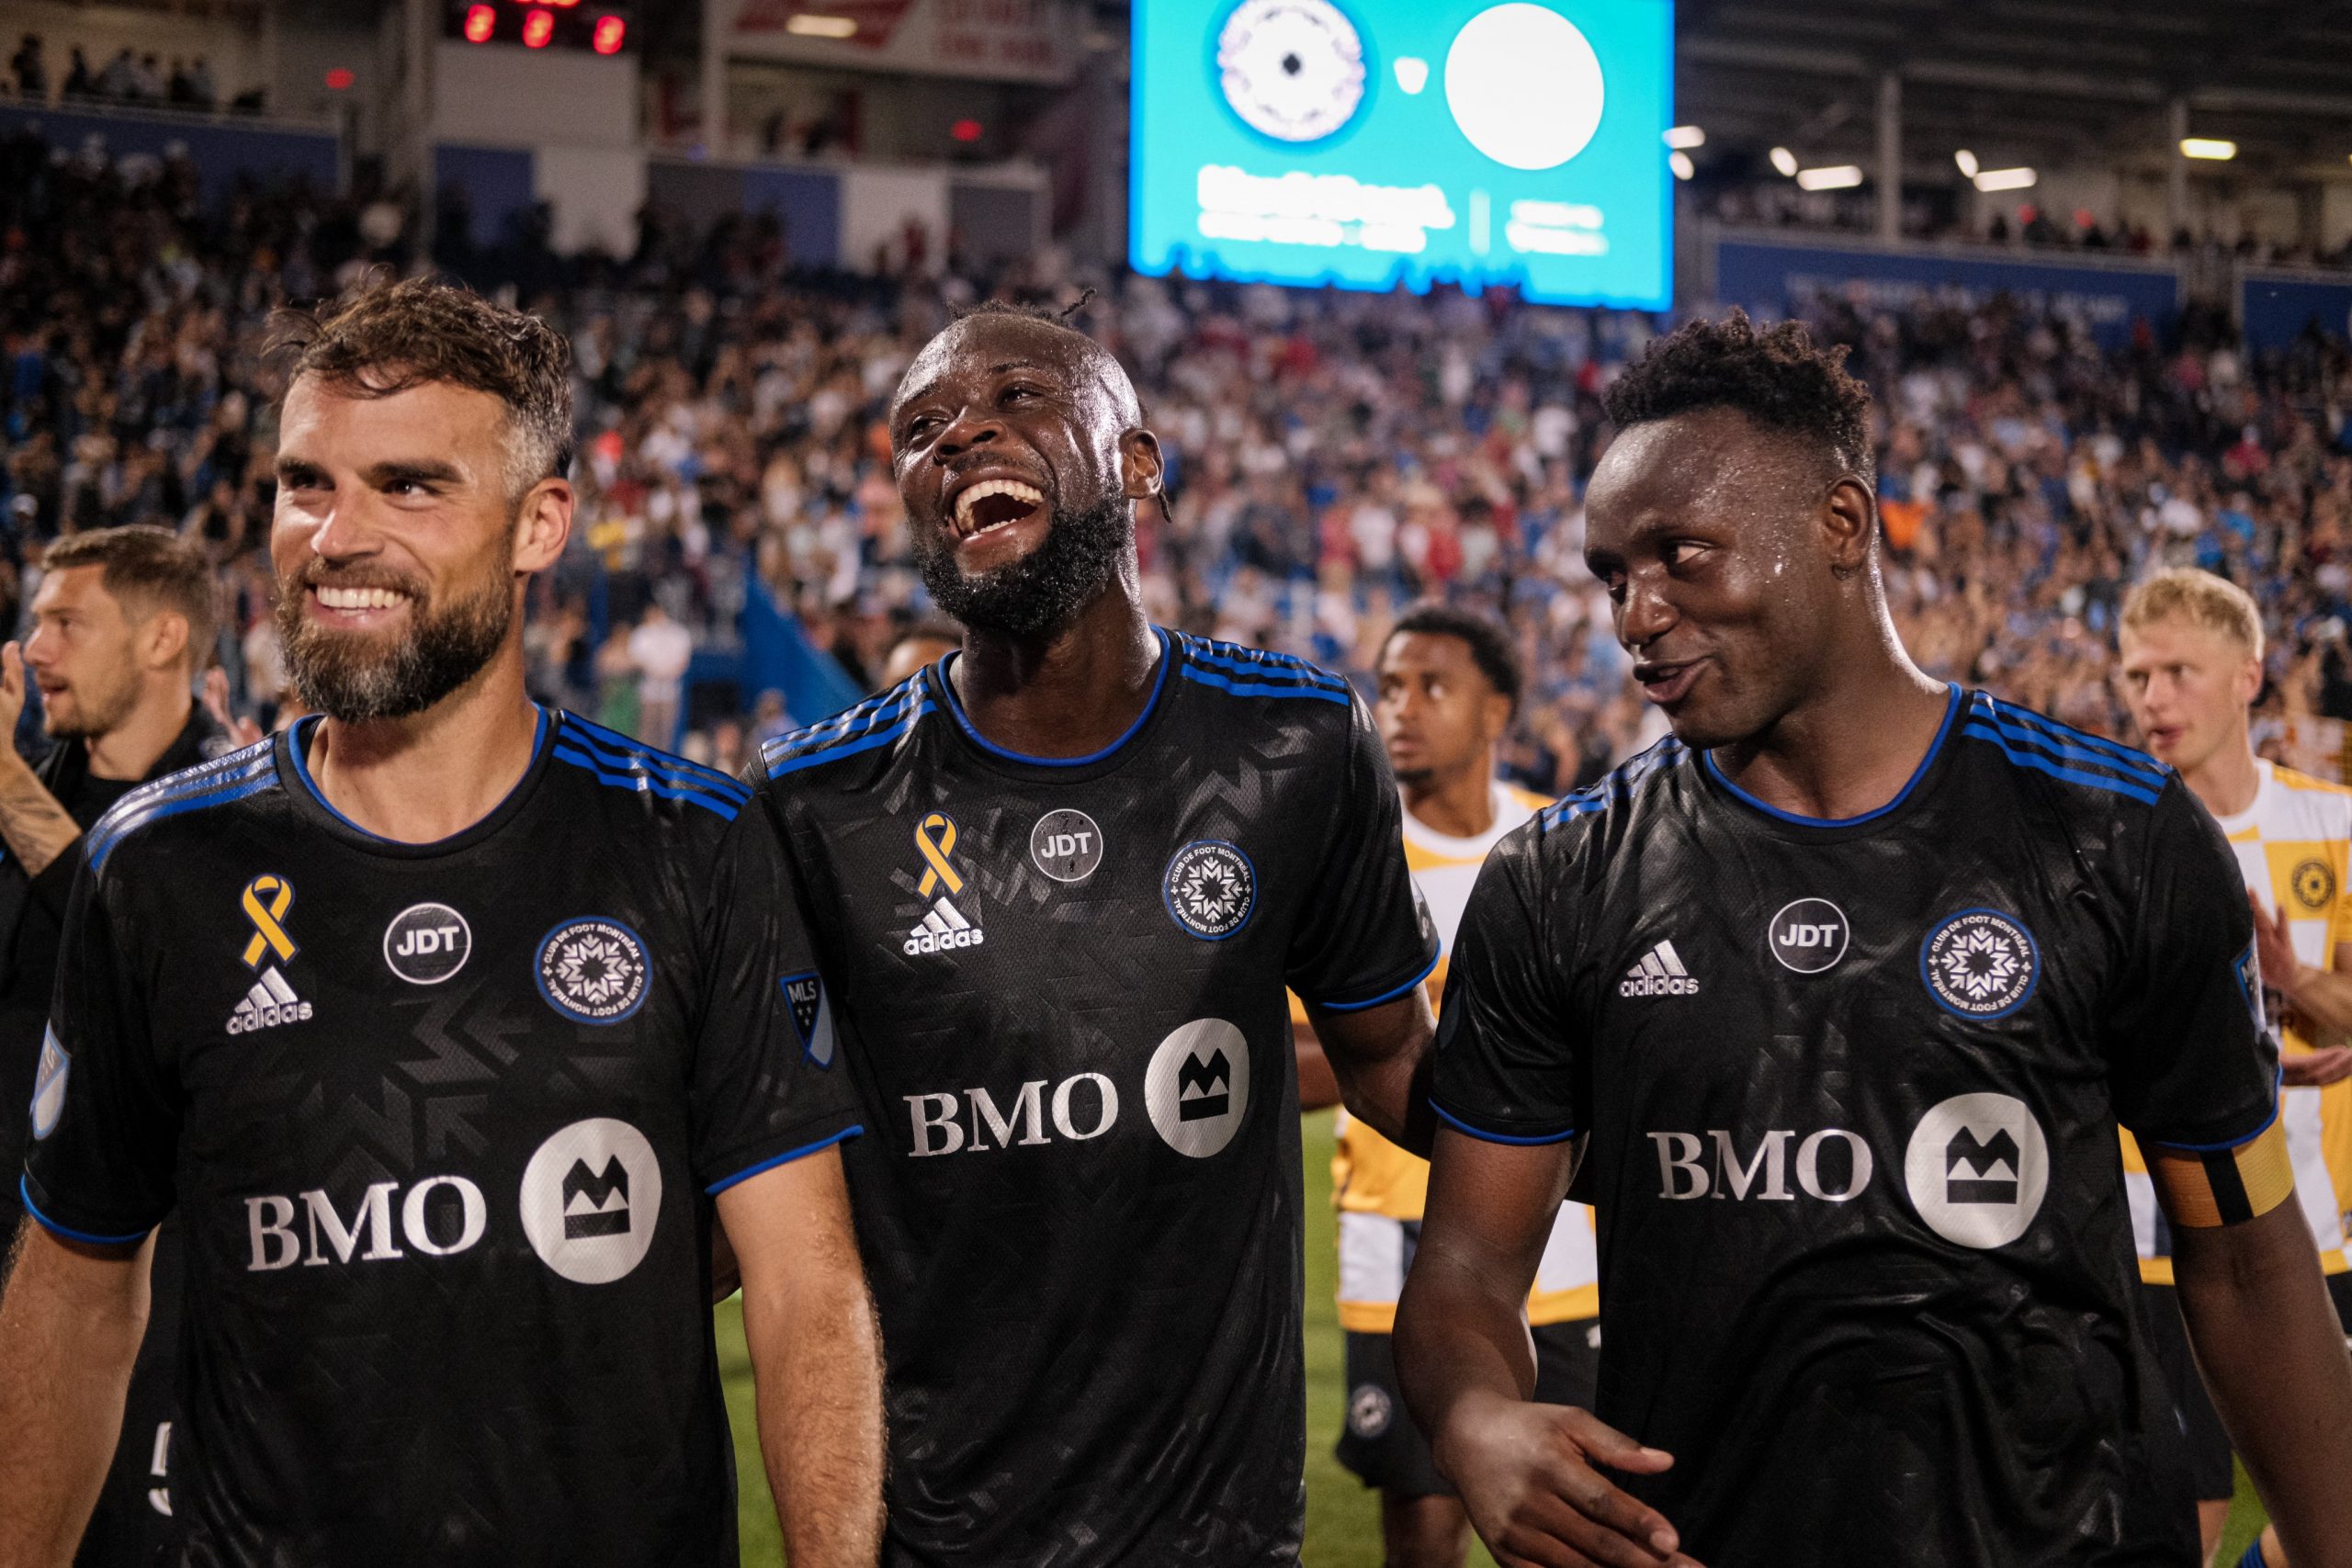 A CF Montreal late comeback and clinch MLS Cup Playoffs spot on September 9, 2022